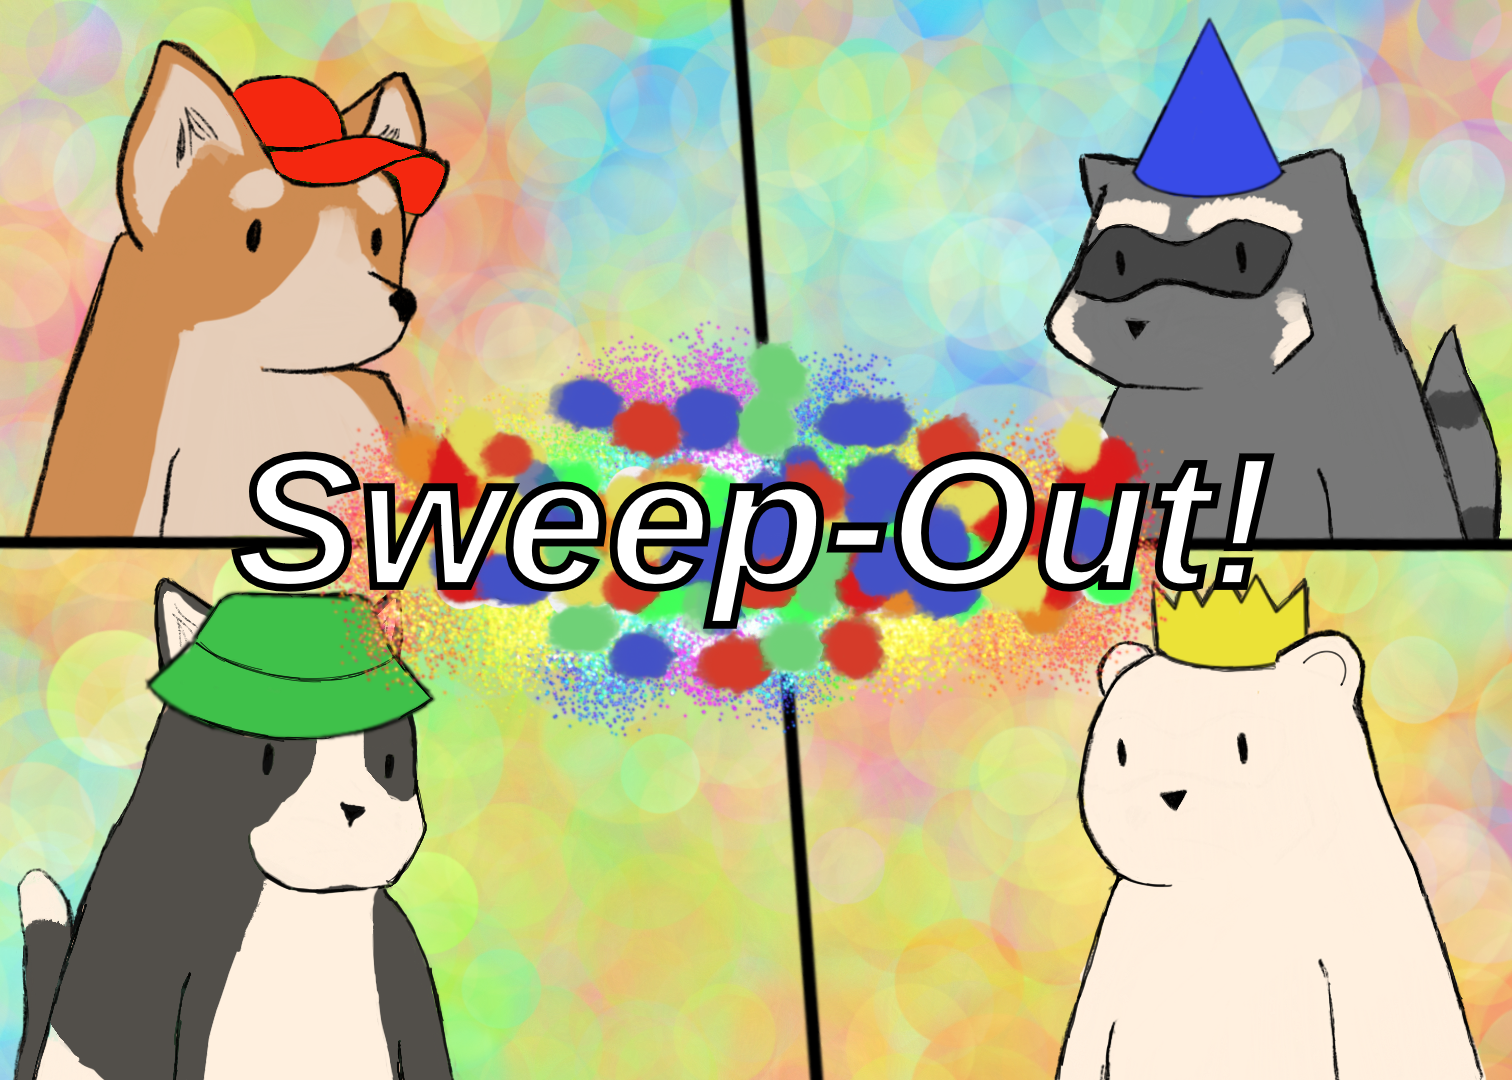 Sweep-Out!